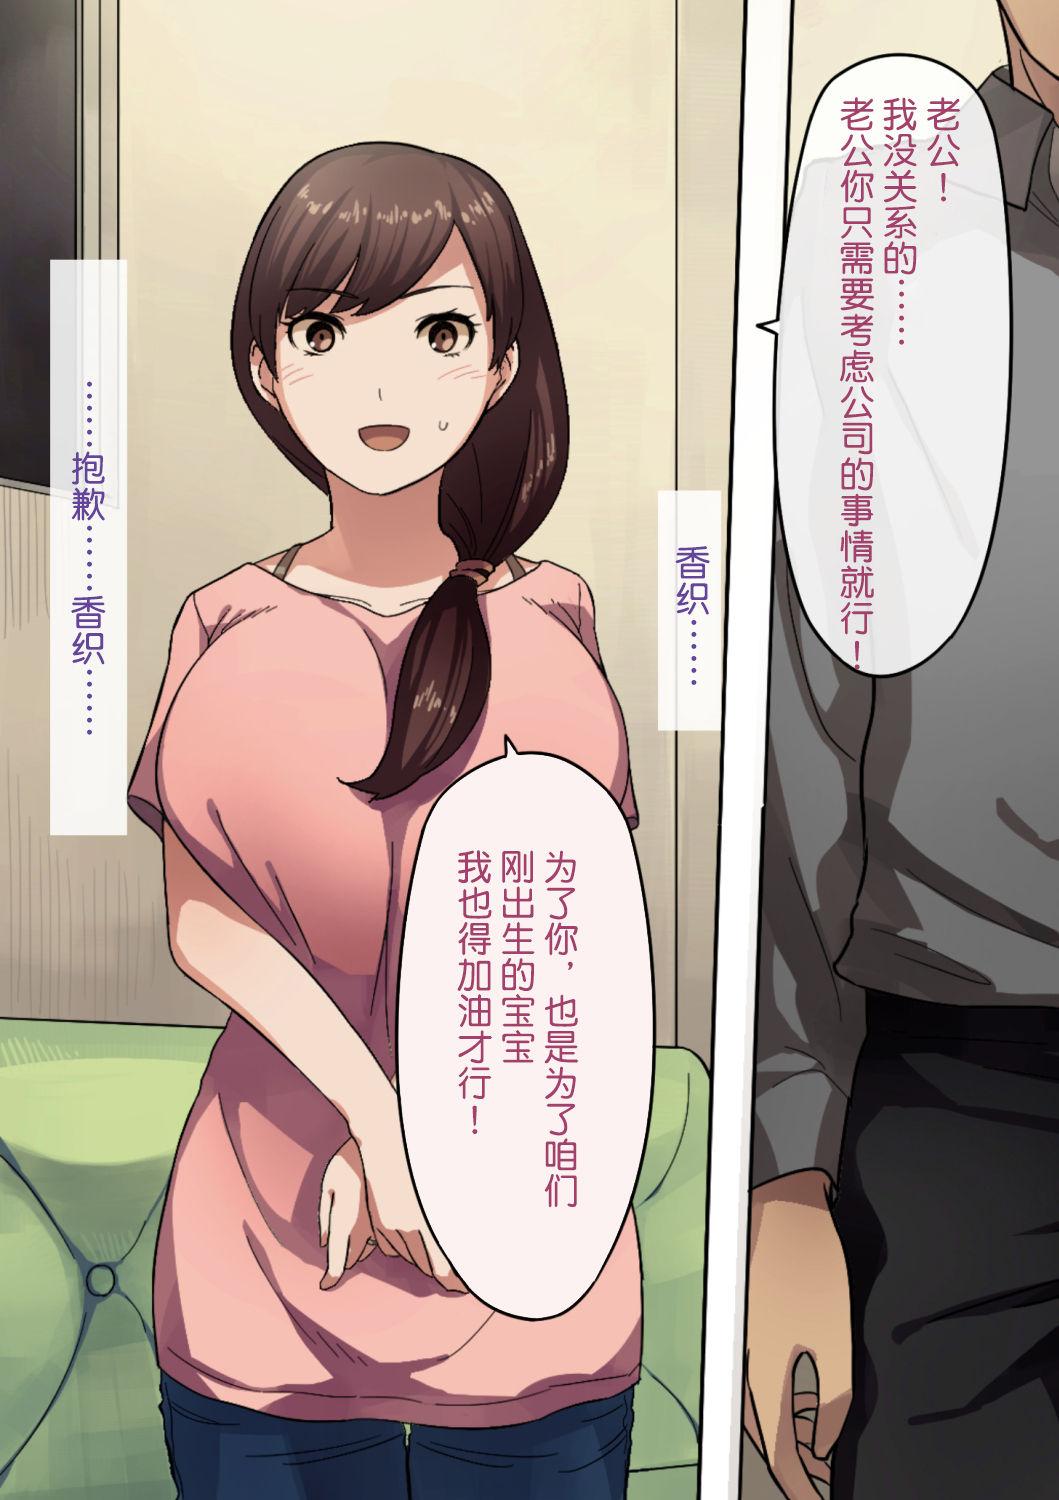 Gay Bus [NT Labo] Aisai, Doui no Ue, Netorare | Beloved Wife - Netorare After Consent[Chinese]【不可视汉化】 Hotwife - Page 5